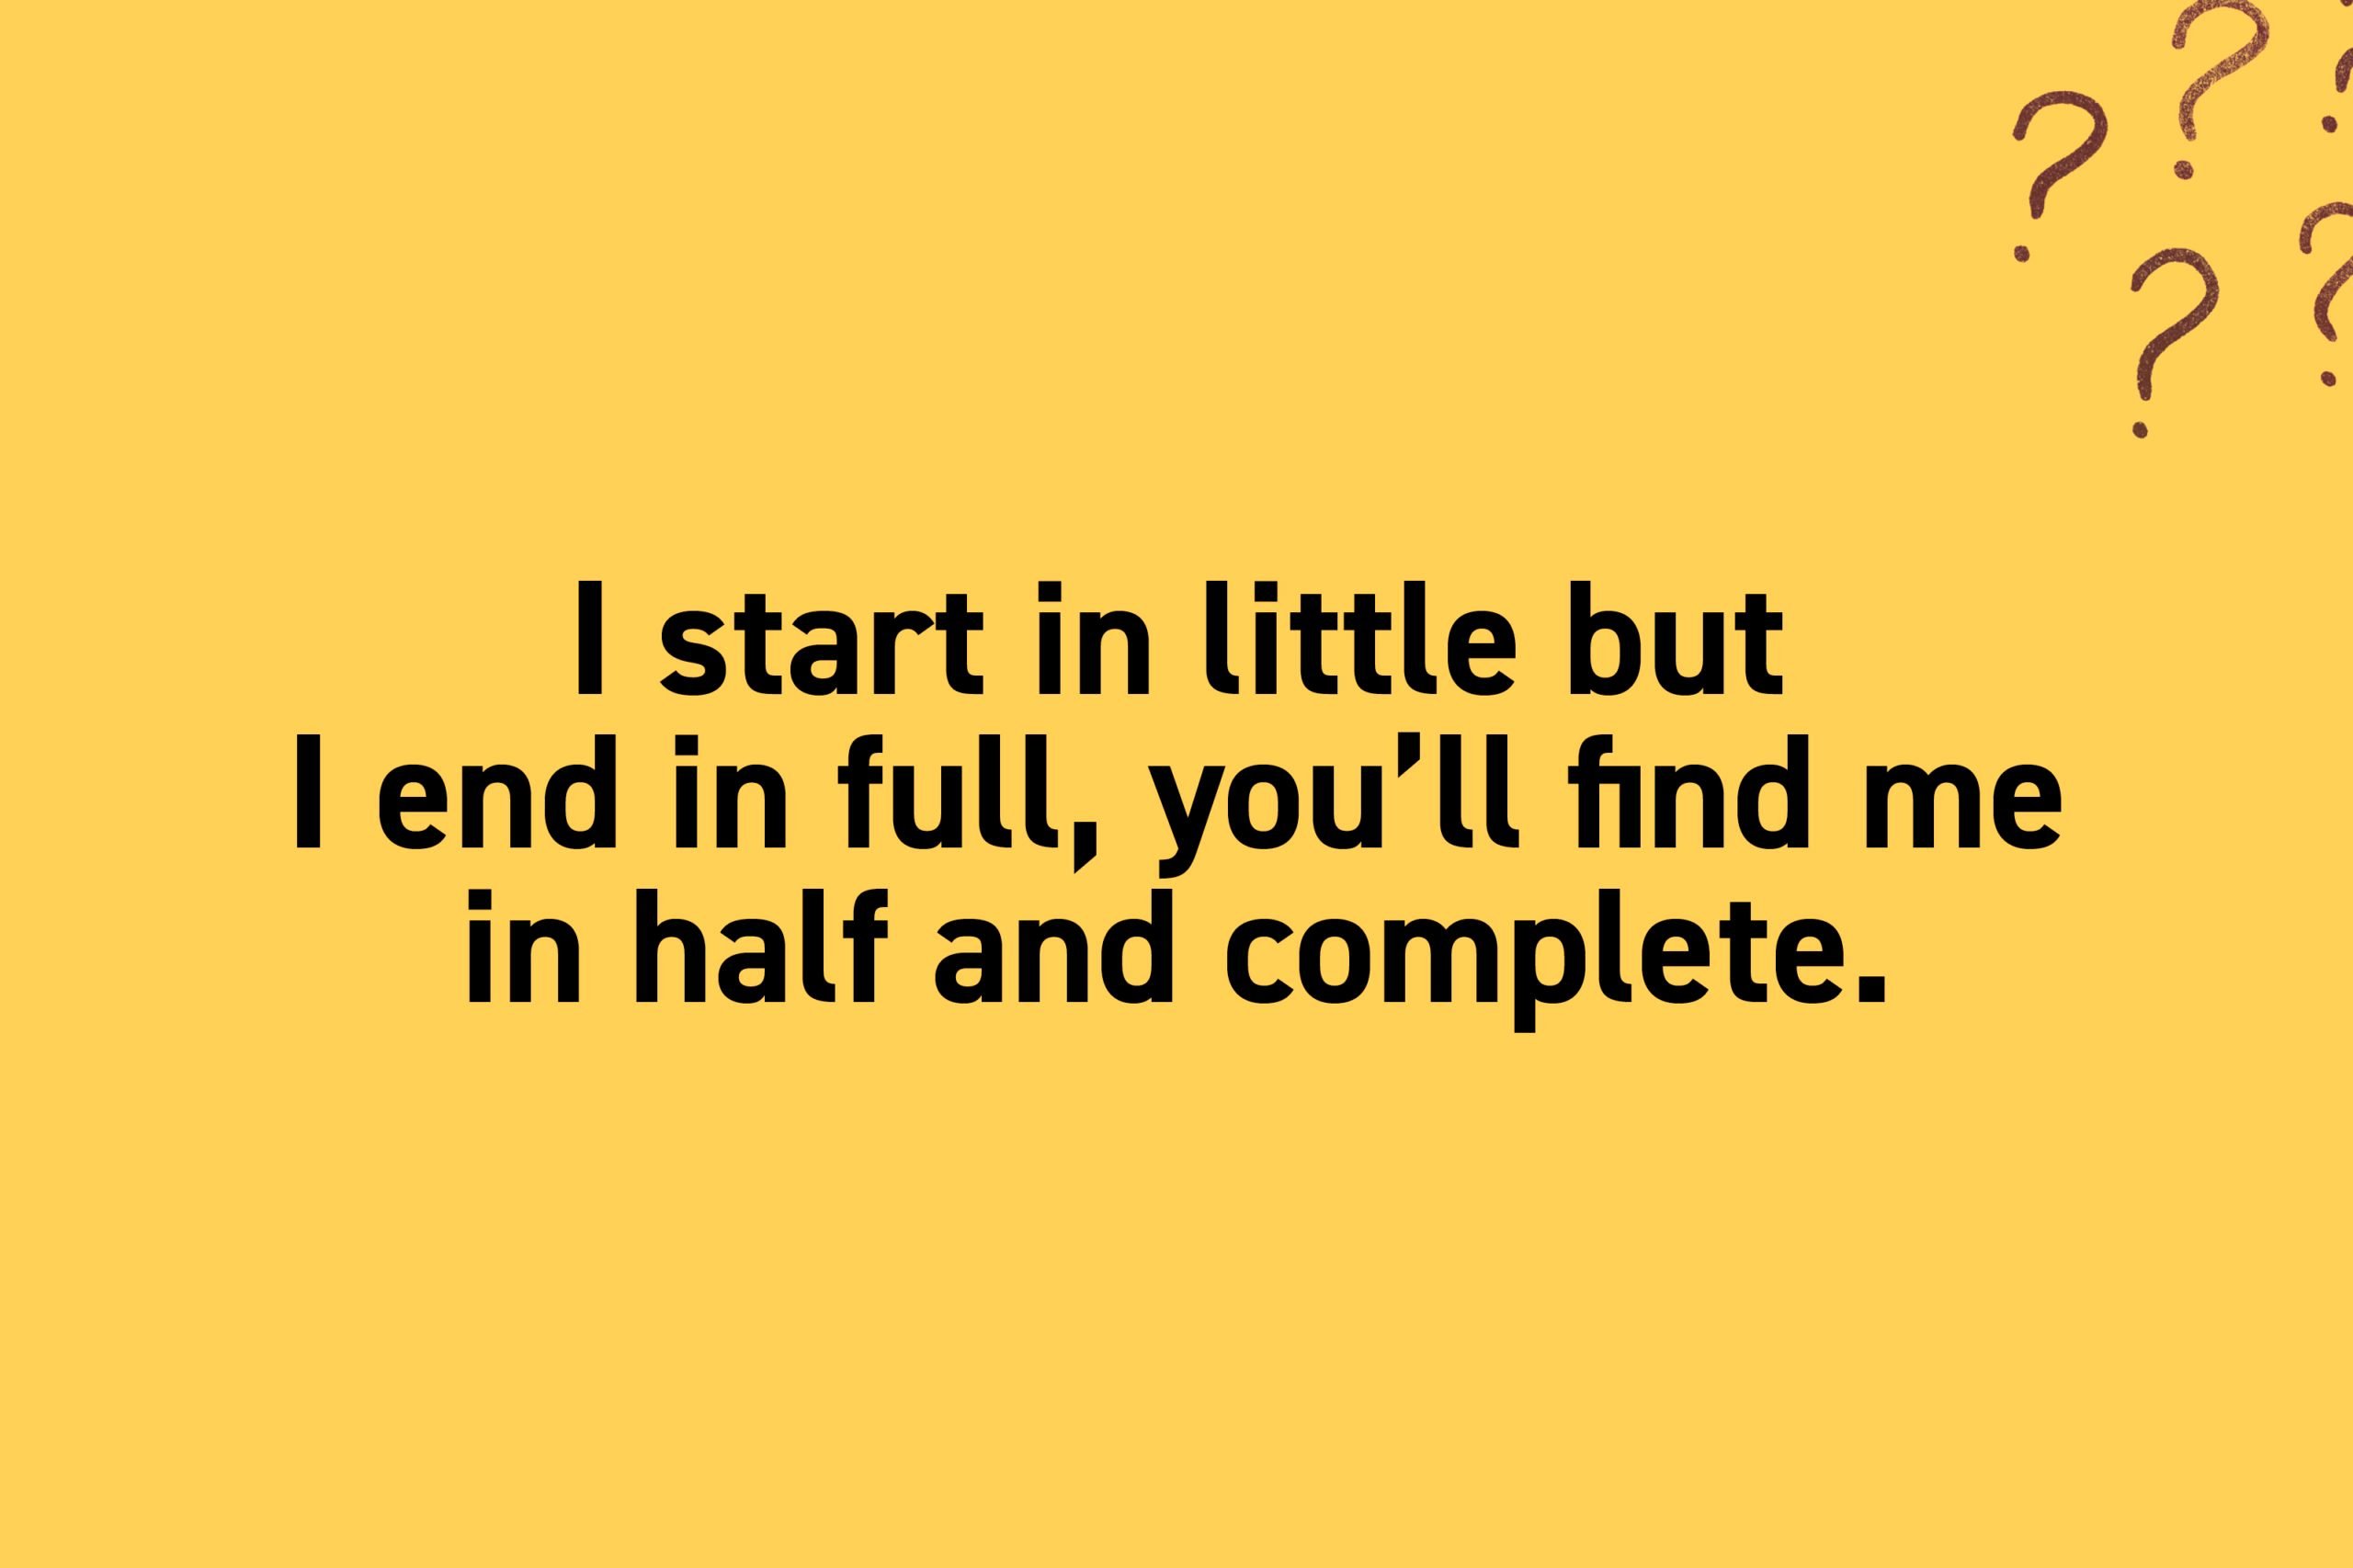 I start in little but I end in full, you'll find me in half and complete.